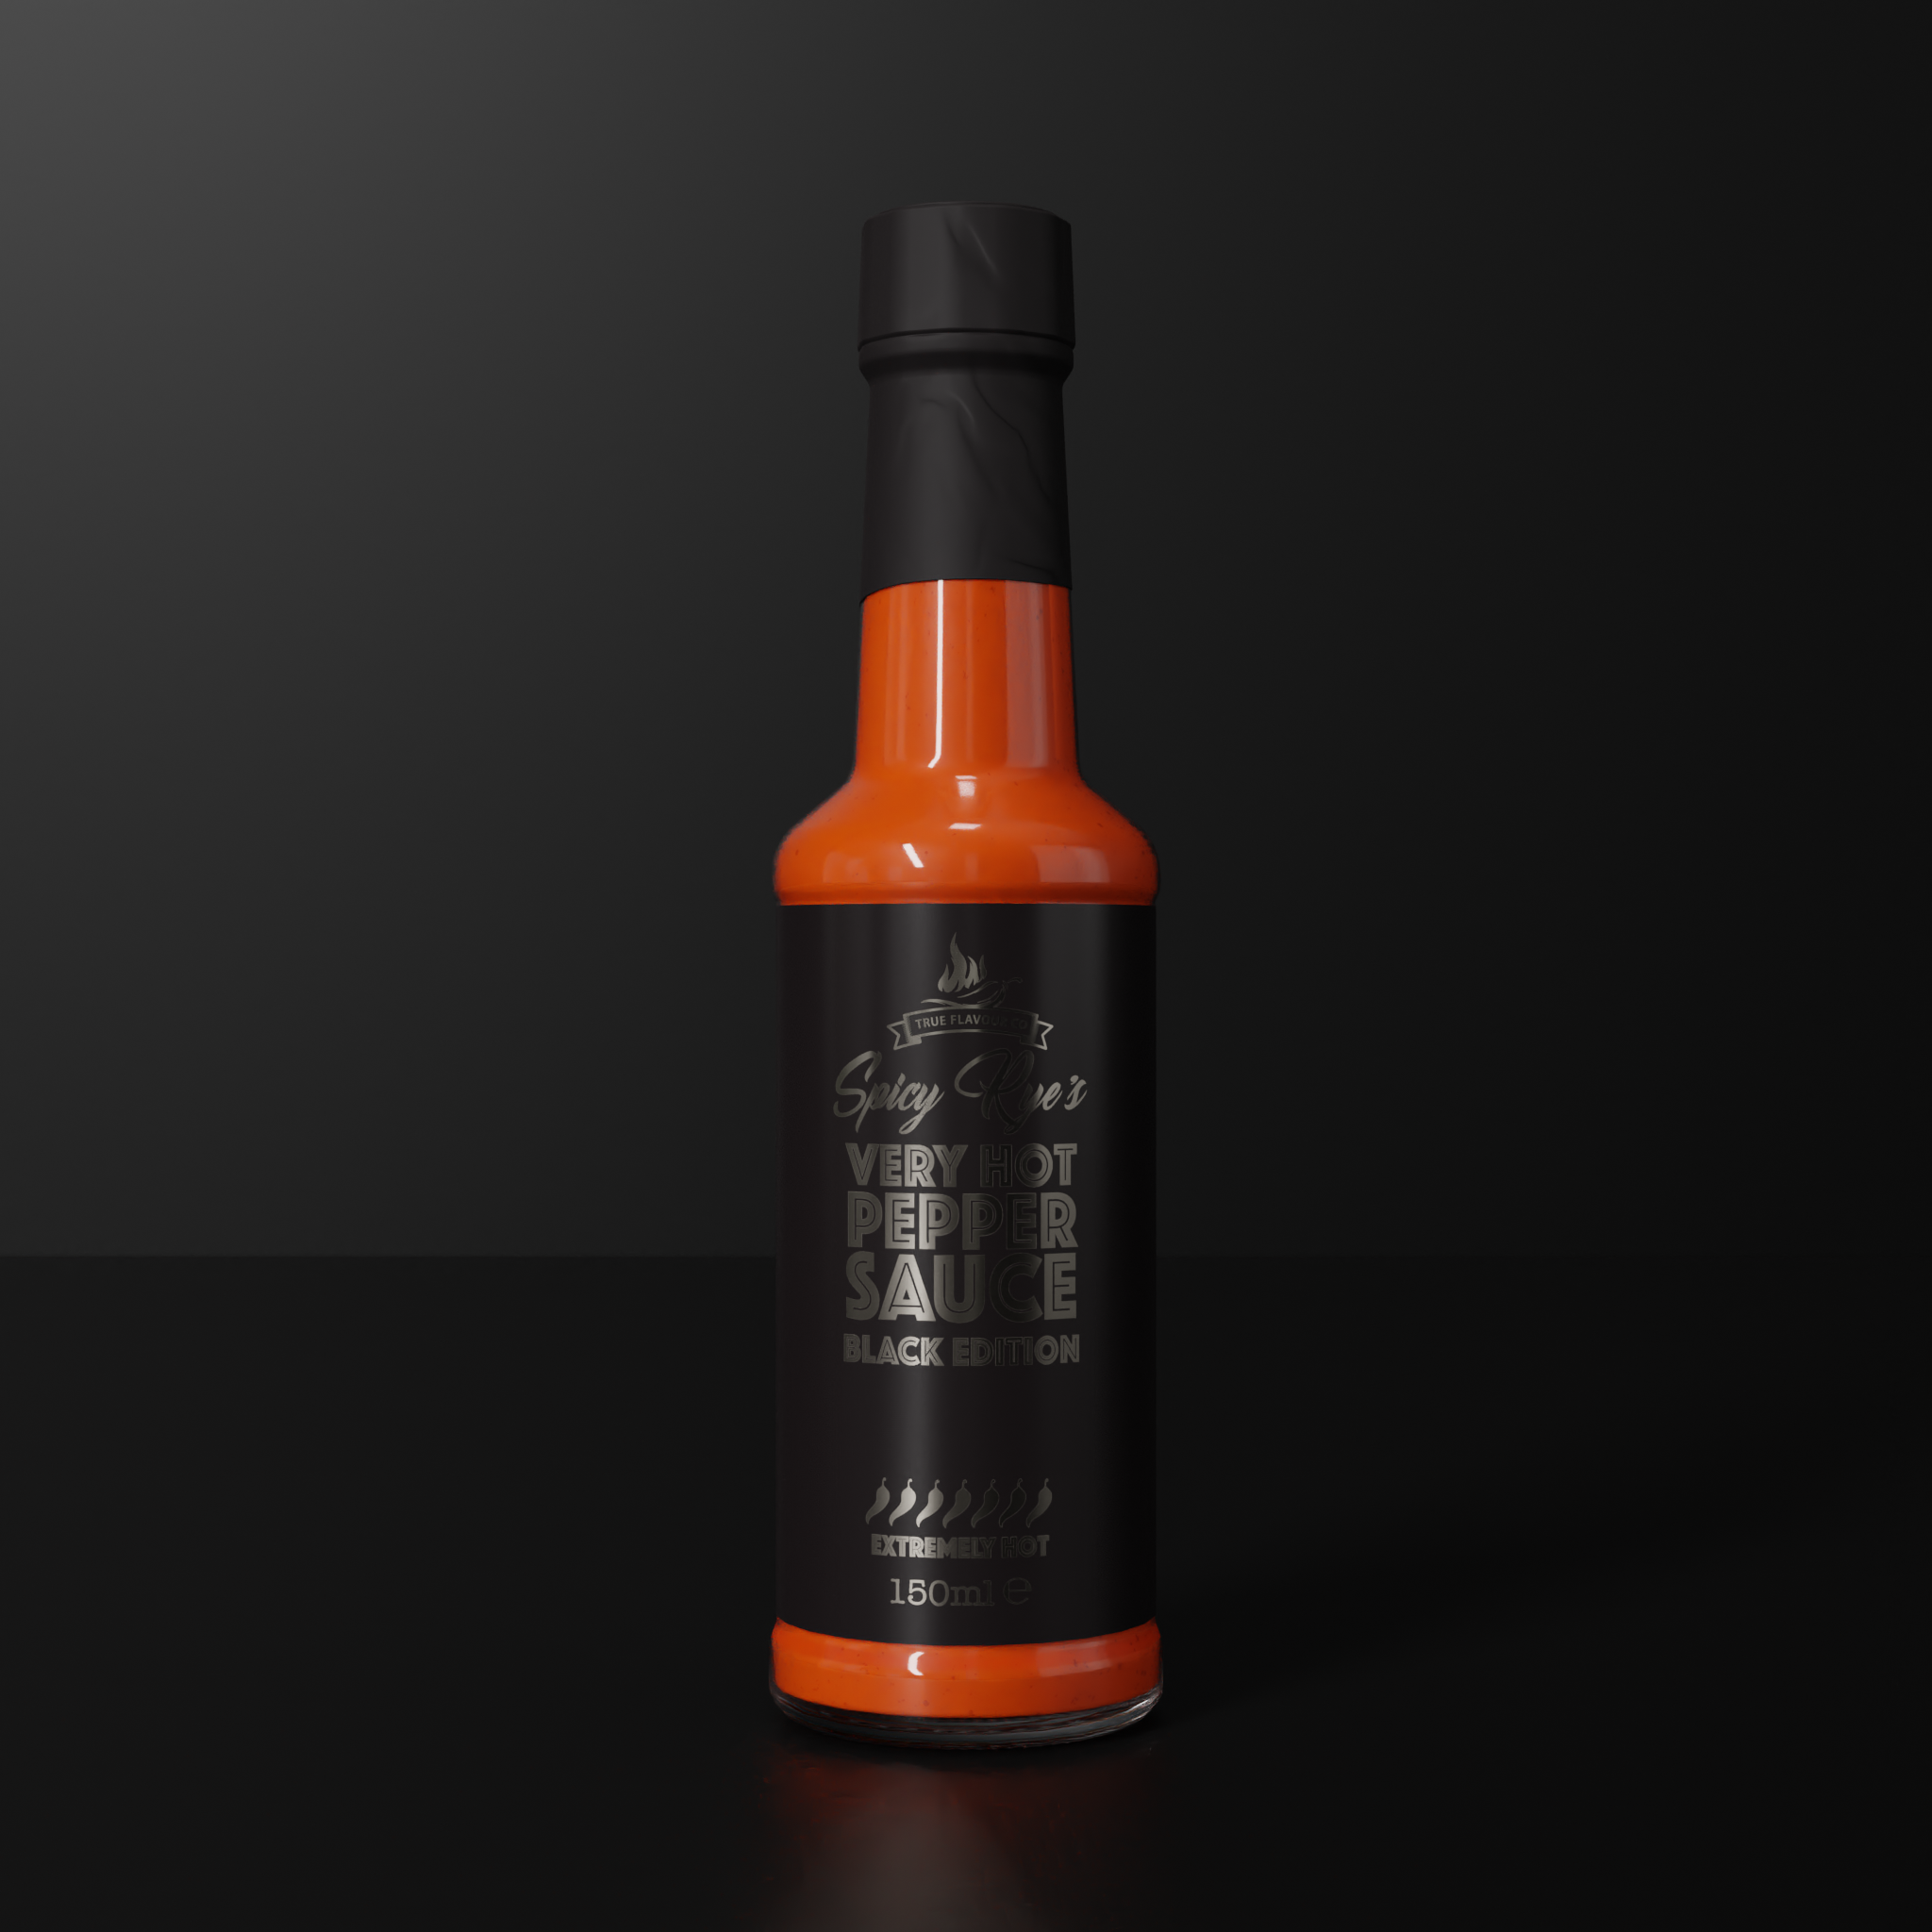 Very Hot Pepper Sauce - Black Edition